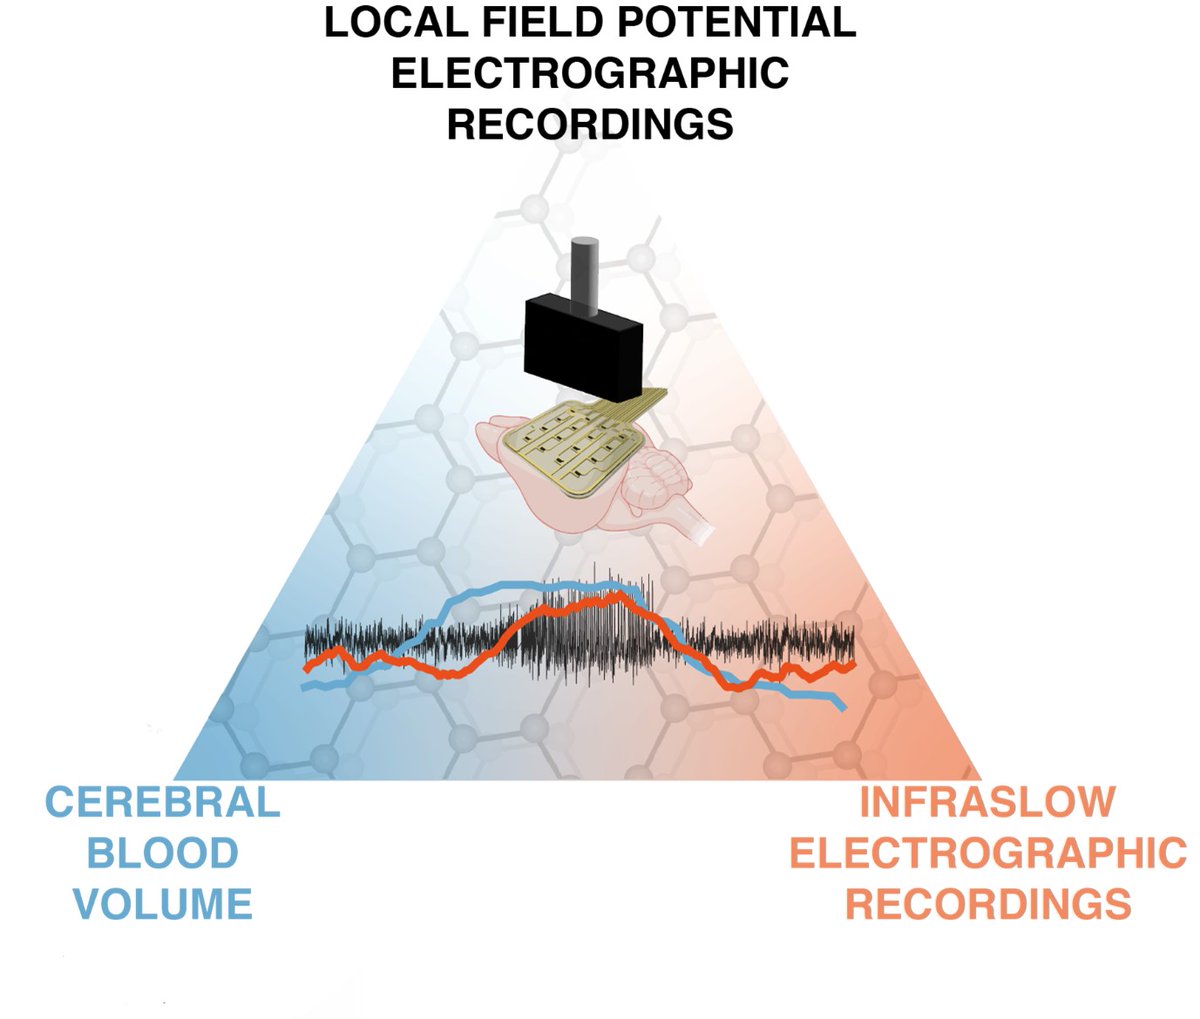 #EpilepsyDay. Interested in seizure transition mechanisms? Preictal blood flow changes and infraslow oscillations detected using #graphene based probes. Collaborative project @GrapheneEU. Published in @nanoscale_rsc @InstVisionParis @icn2nano @imb_cnm @EpilepsyInst